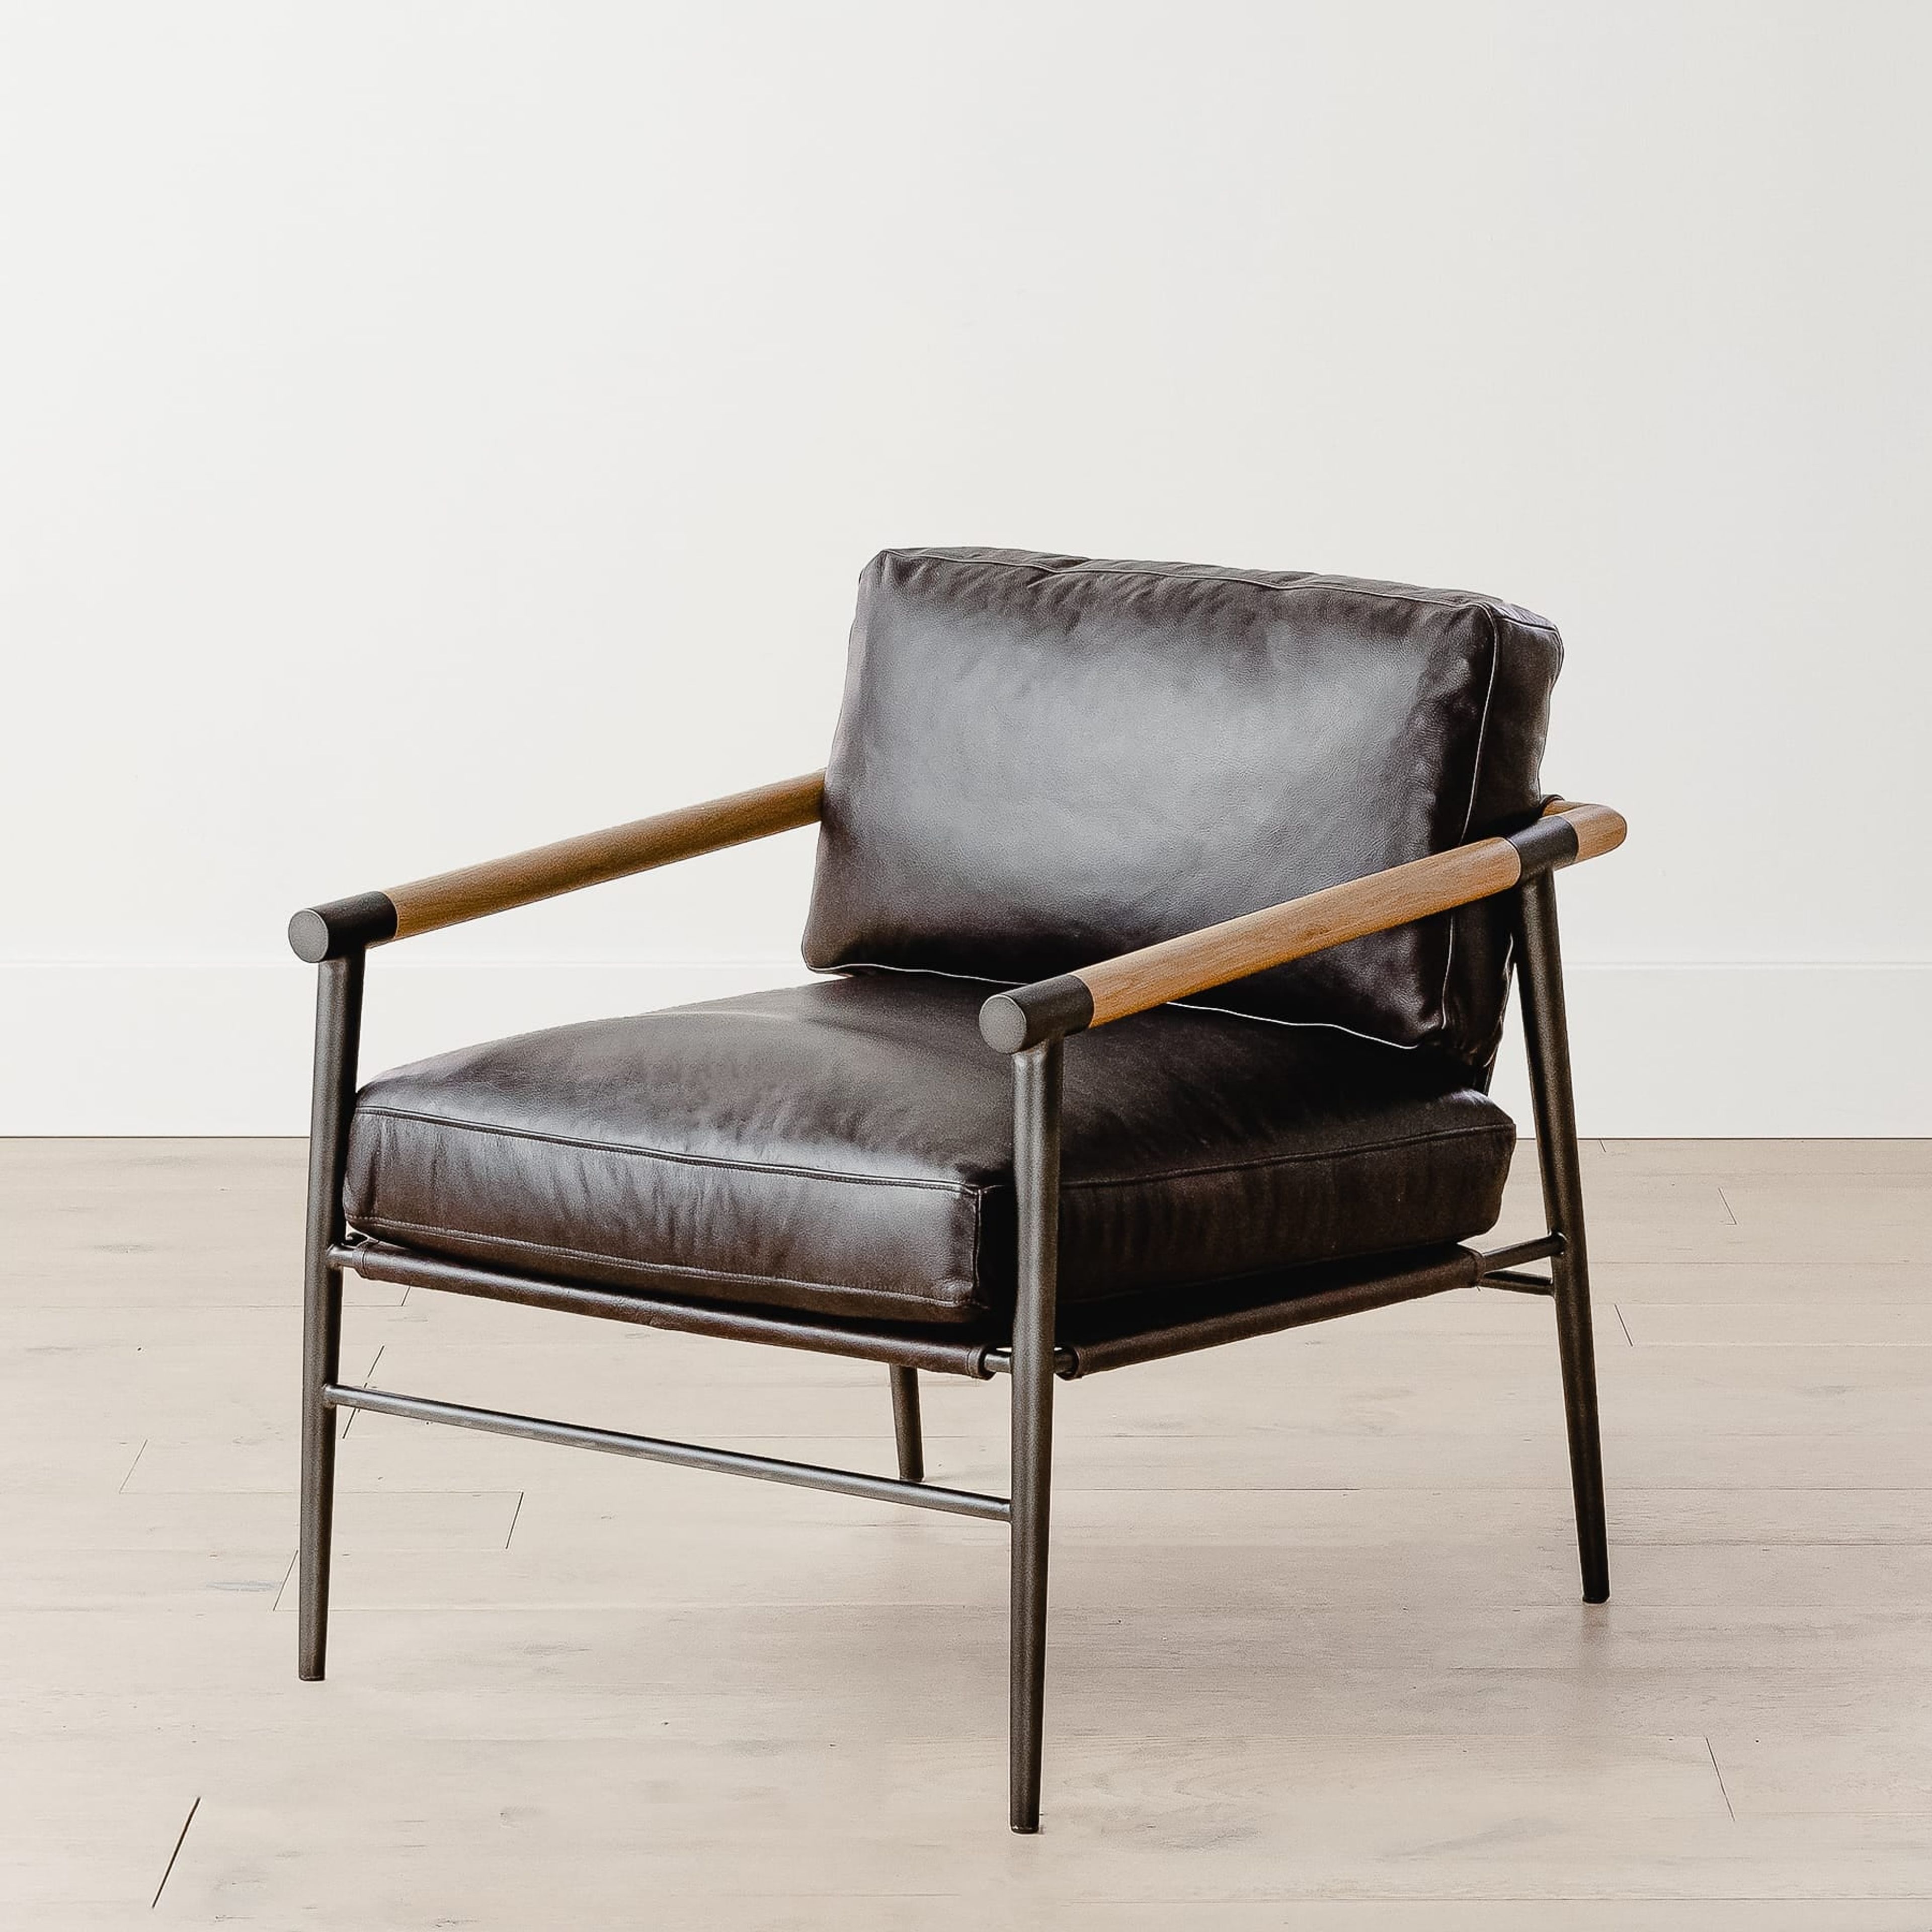 Charles Black Leather Chair